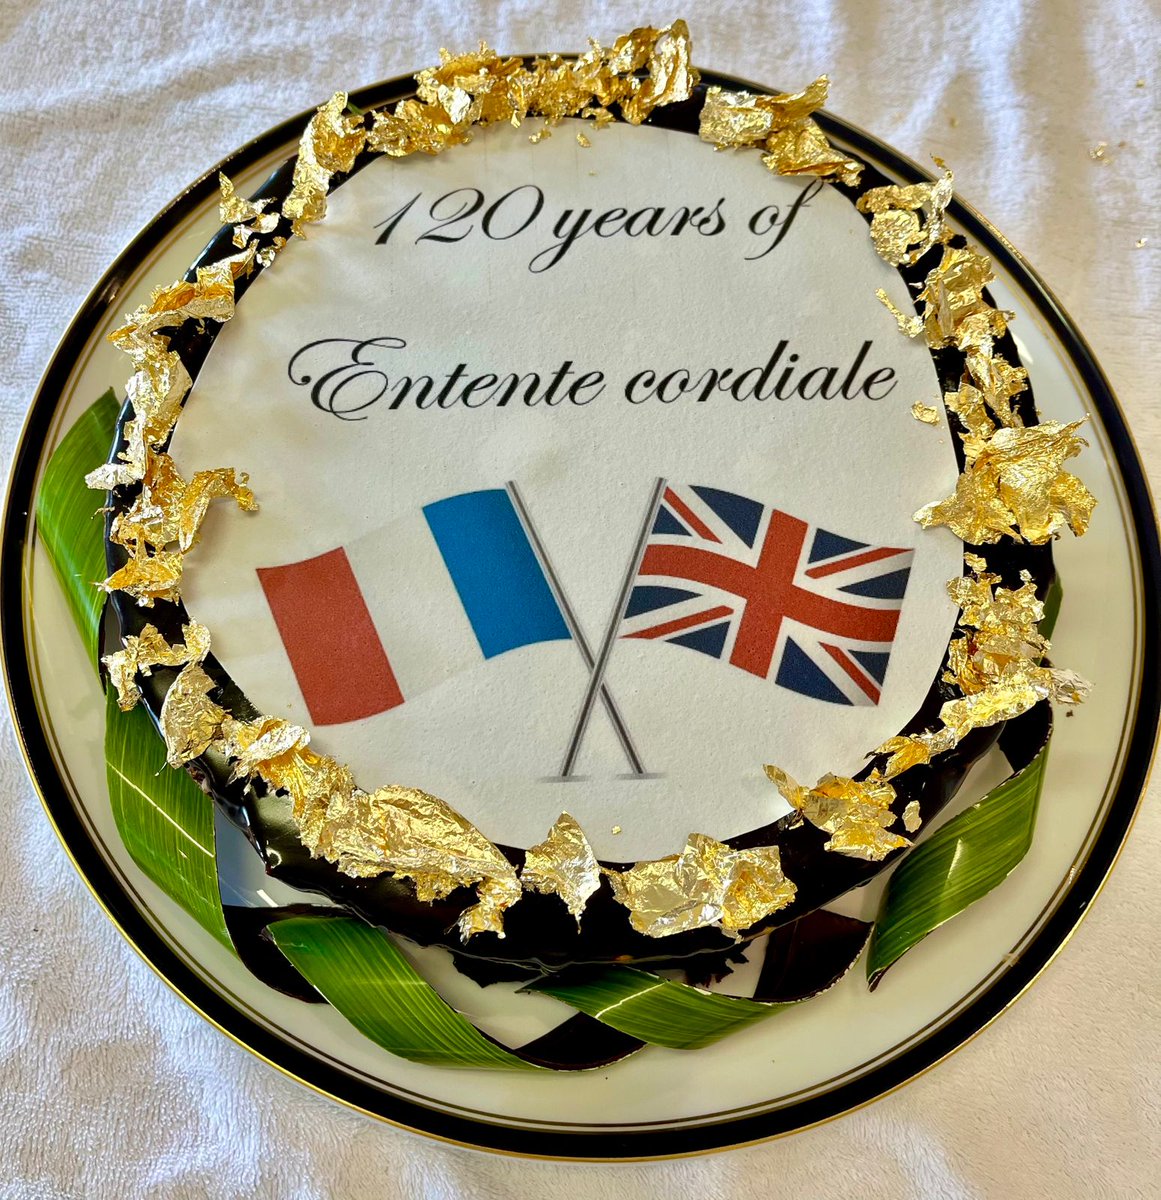 #ententecordiale120 This week marks 120 years since the signing of the Entente Cordiale, ushering in a new era of 🇫🇷 and 🇬🇧 relations. Today, Ambassador @Laurence_Beau and High Commissioner @IonaCThomas reflected on our enduring friendship. Vive l’amitié franco-britannique !